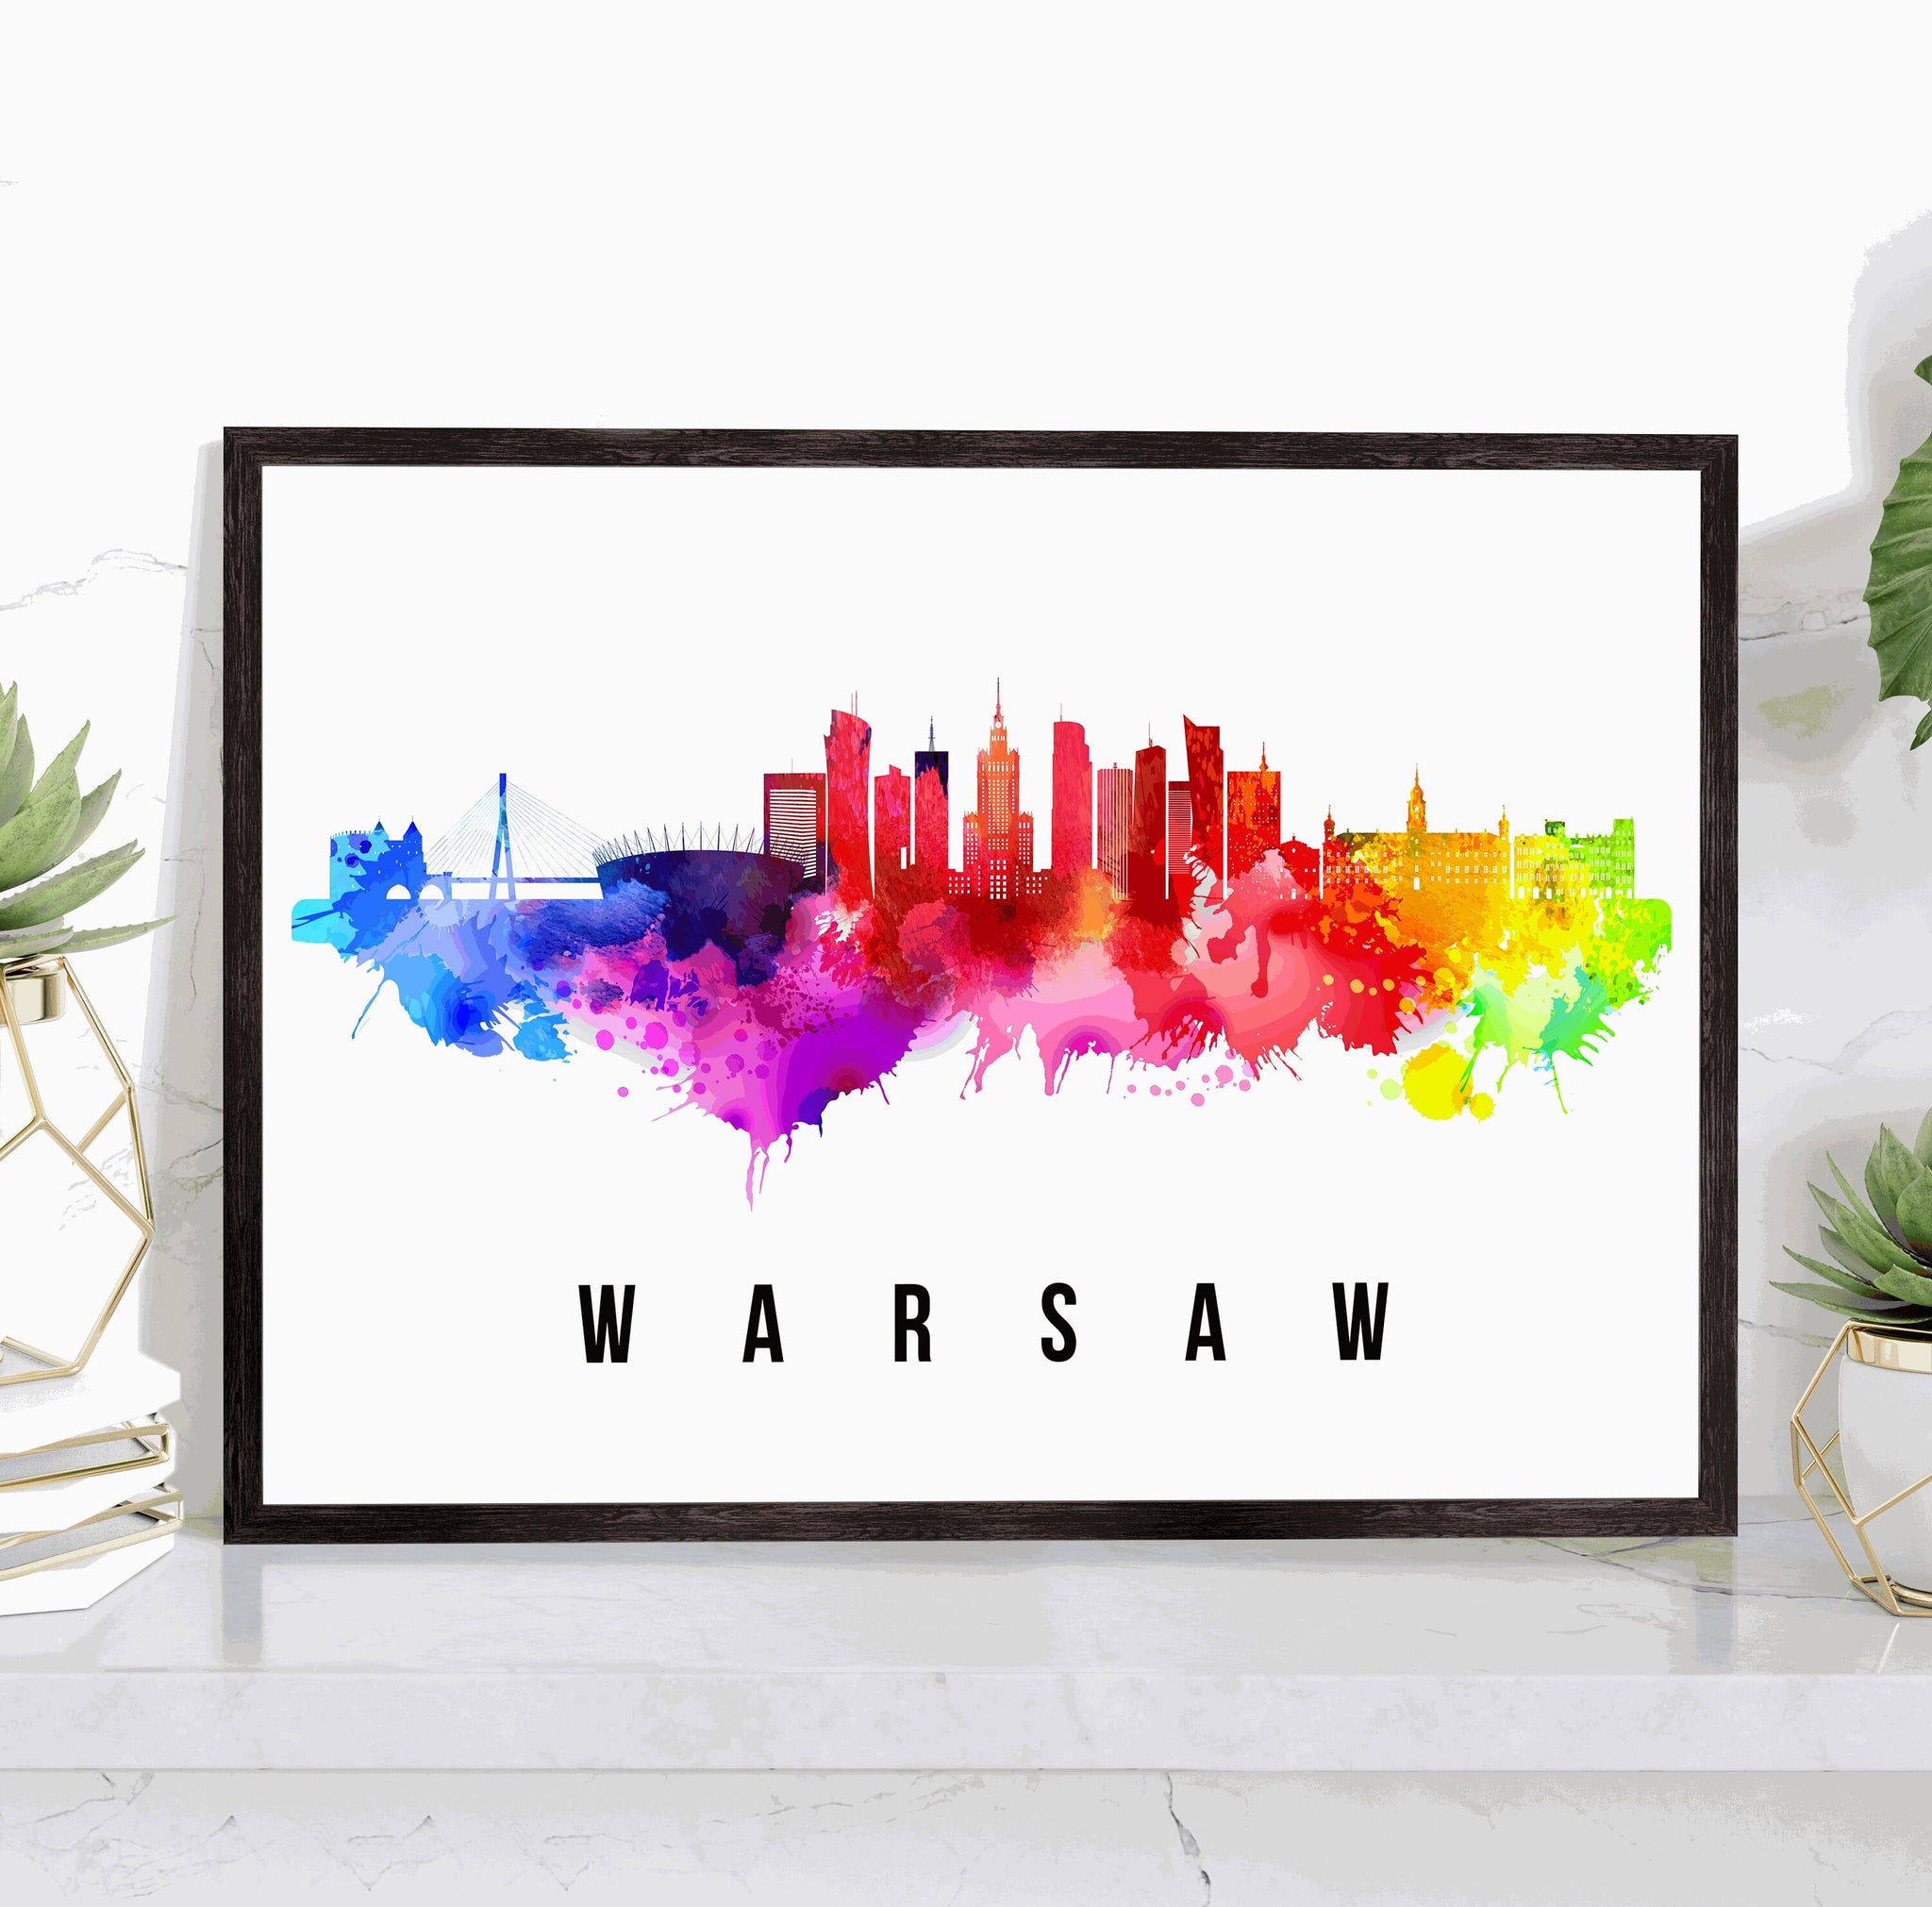 WARSAW - POLAND Poster, Skyline Poster Cityscape and Landmark Warsaw City Illustration Home Wall Art, Office Decor